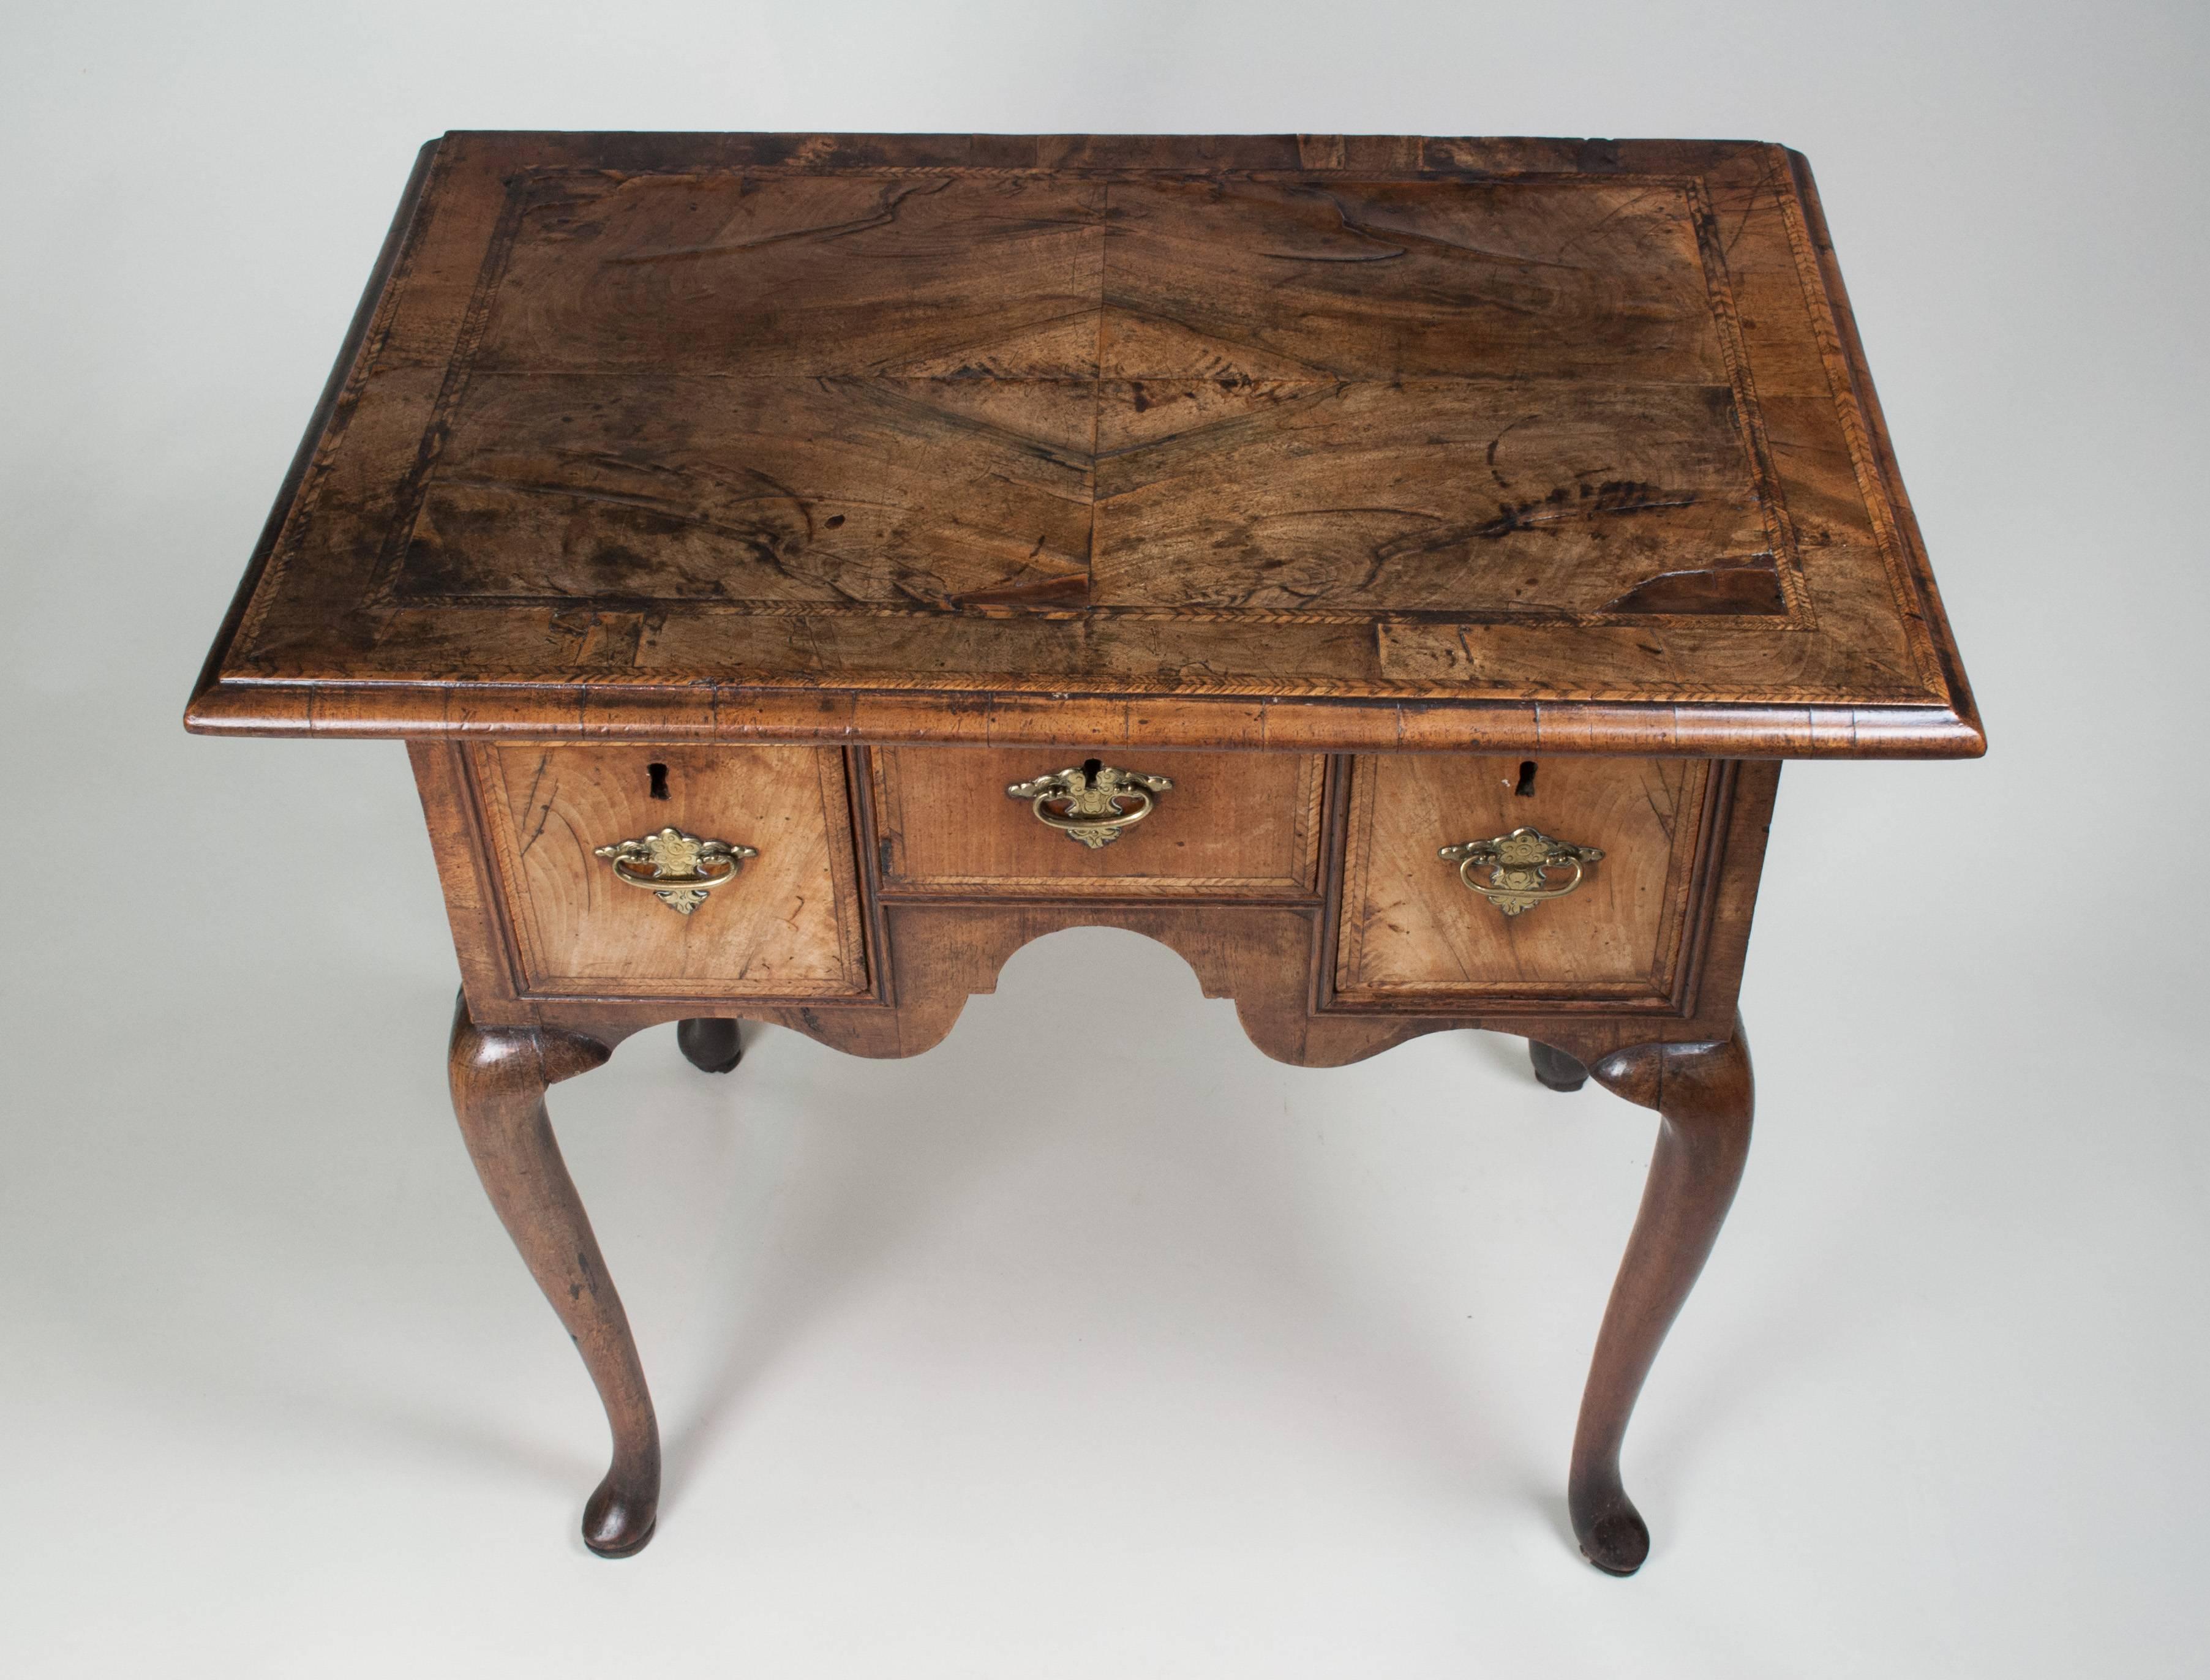 A Fine early 18th century walnut veneered three-drawer Lowboy of small size. The quarter veneered top with herringbone banding either side of a wide walnut cross-band, above three small drawers with conforming herringbone banding and set in an